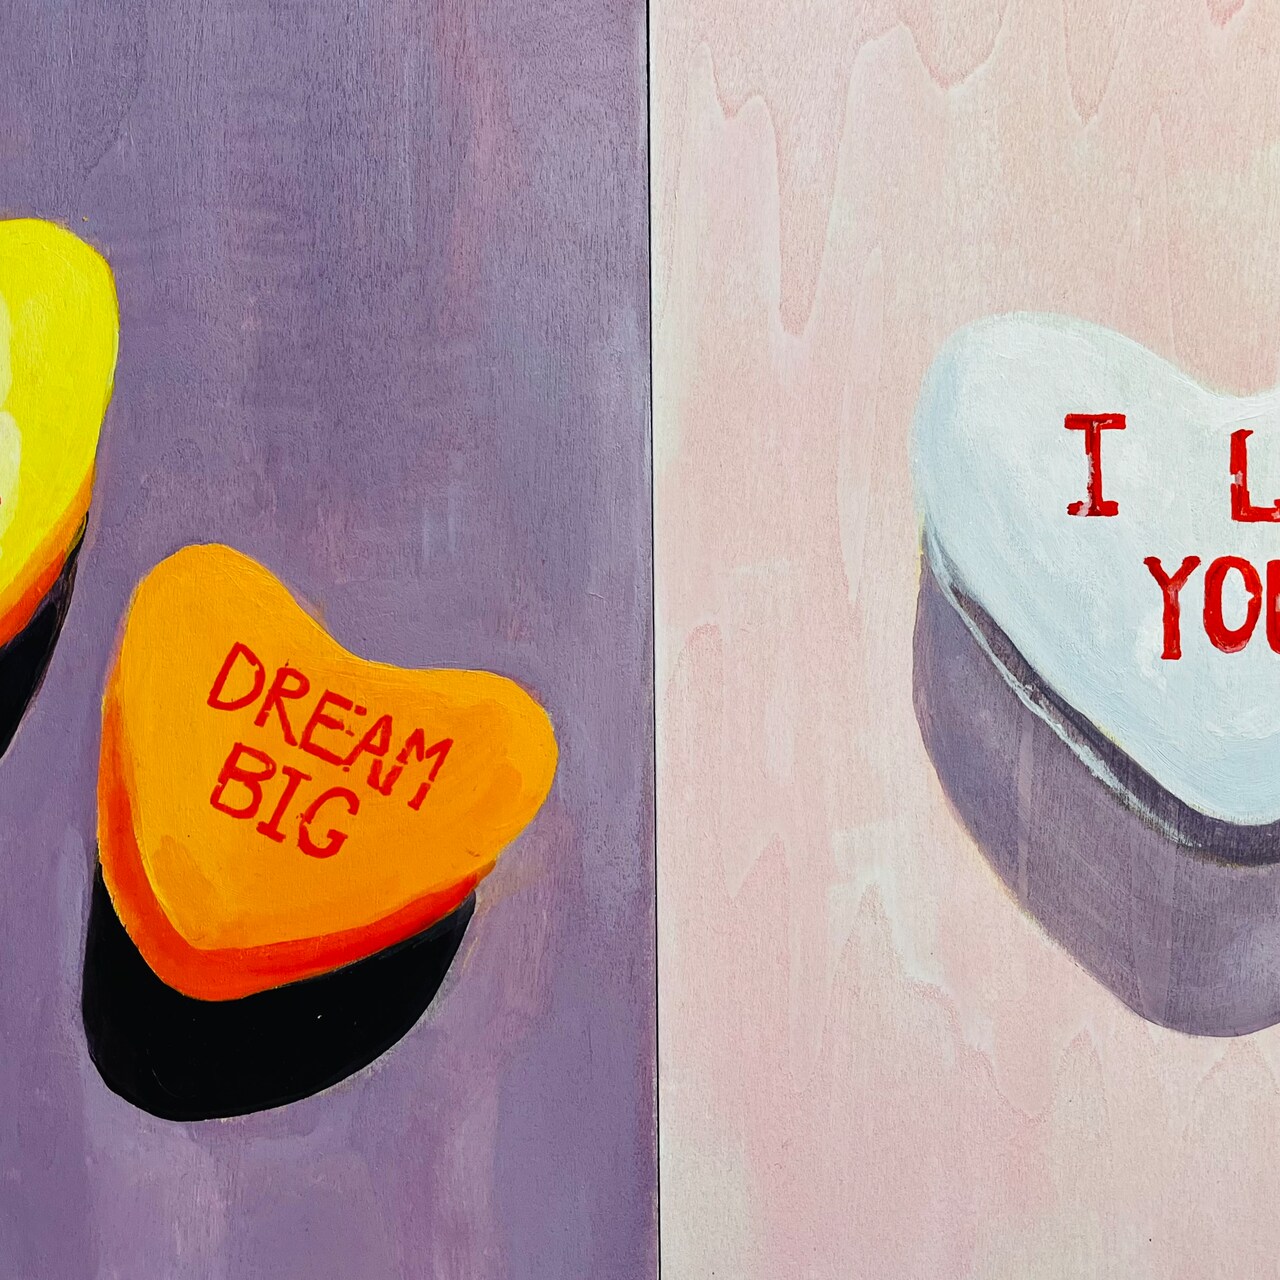 Date Night Painting: Valentine's Day Diptych Painting Acrylic on Wood Panels